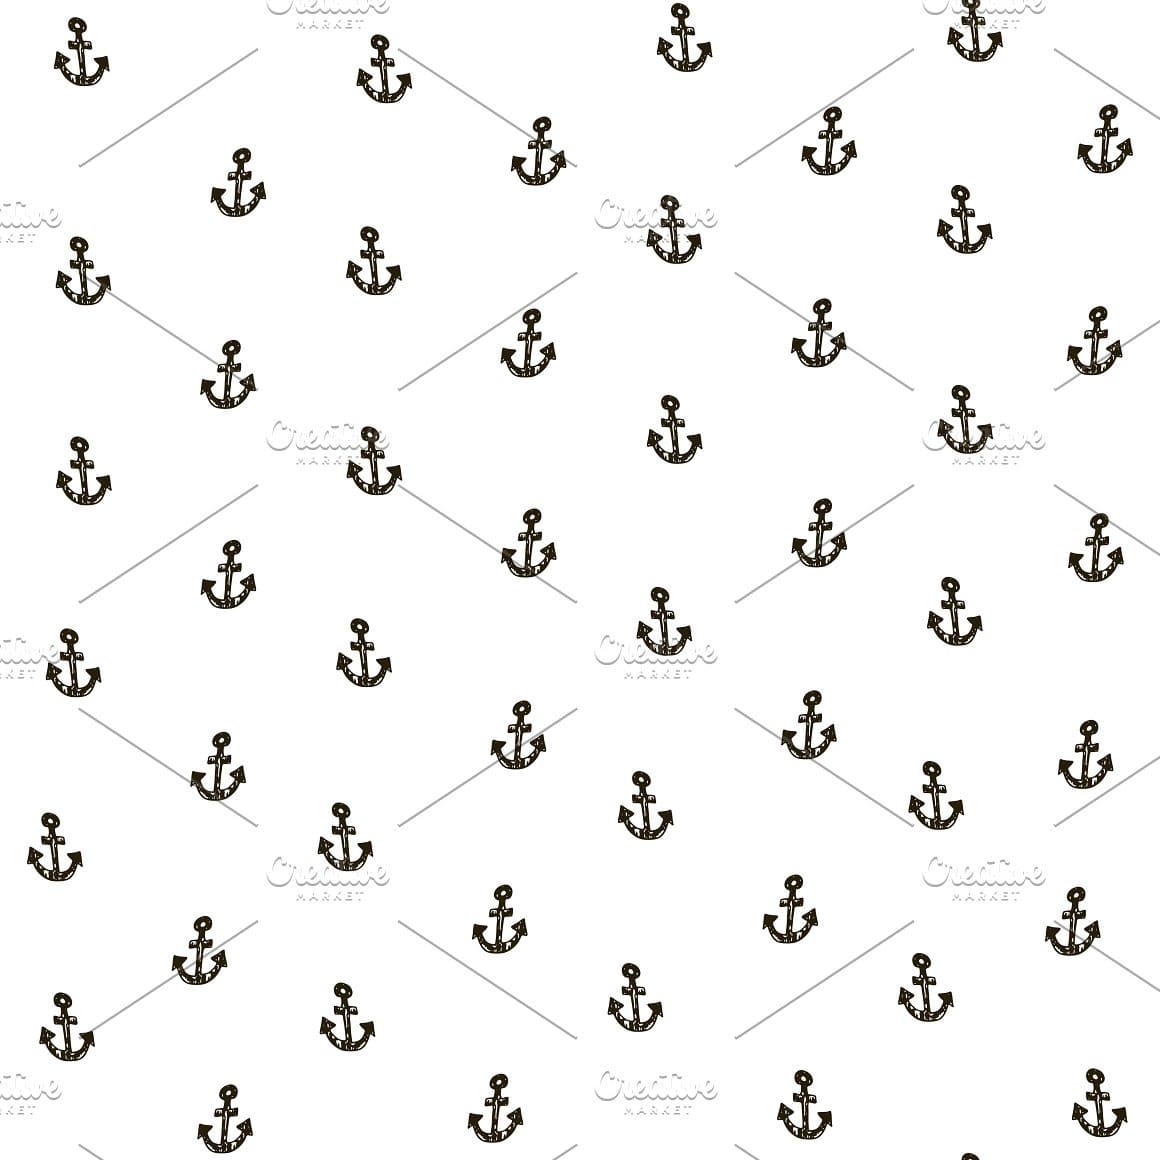 Black anchors on a white background.